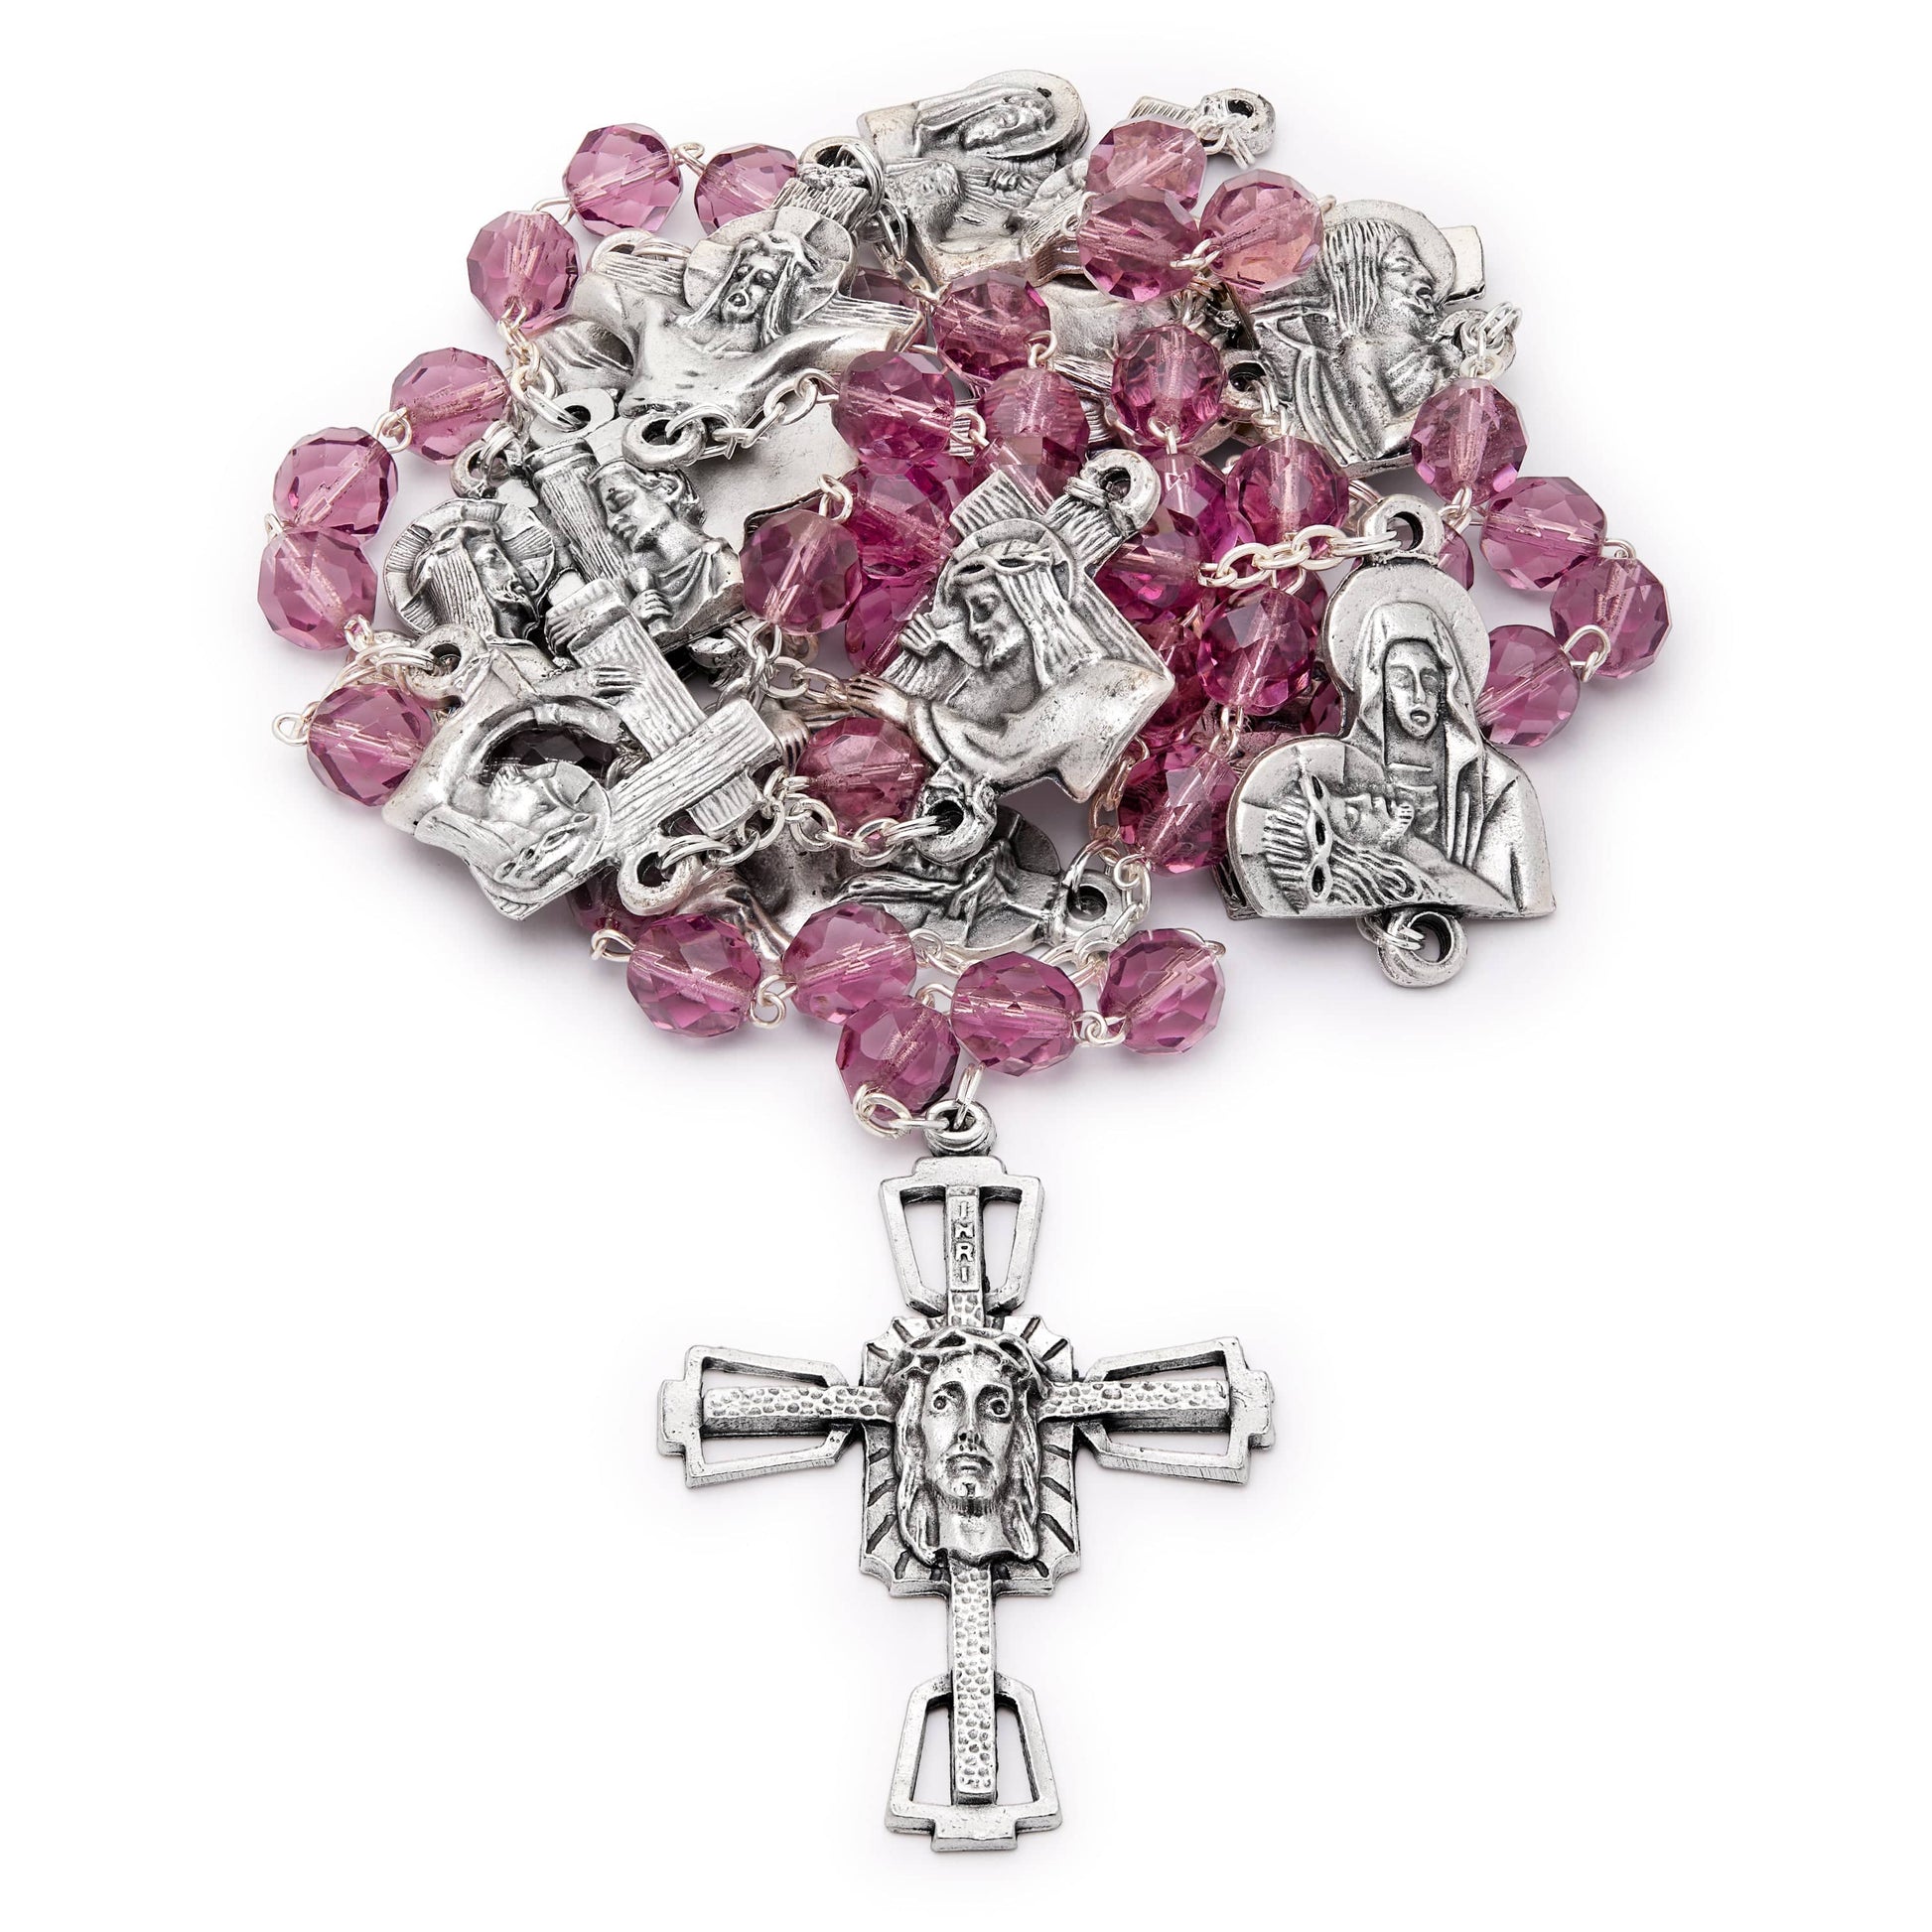 MONDO CATTOLICO Prayer Beads 71 cm (27.95 in) / 7.5 mm (0.29 in) Station of the Cross Rosary in faceted crystal amethyst beads